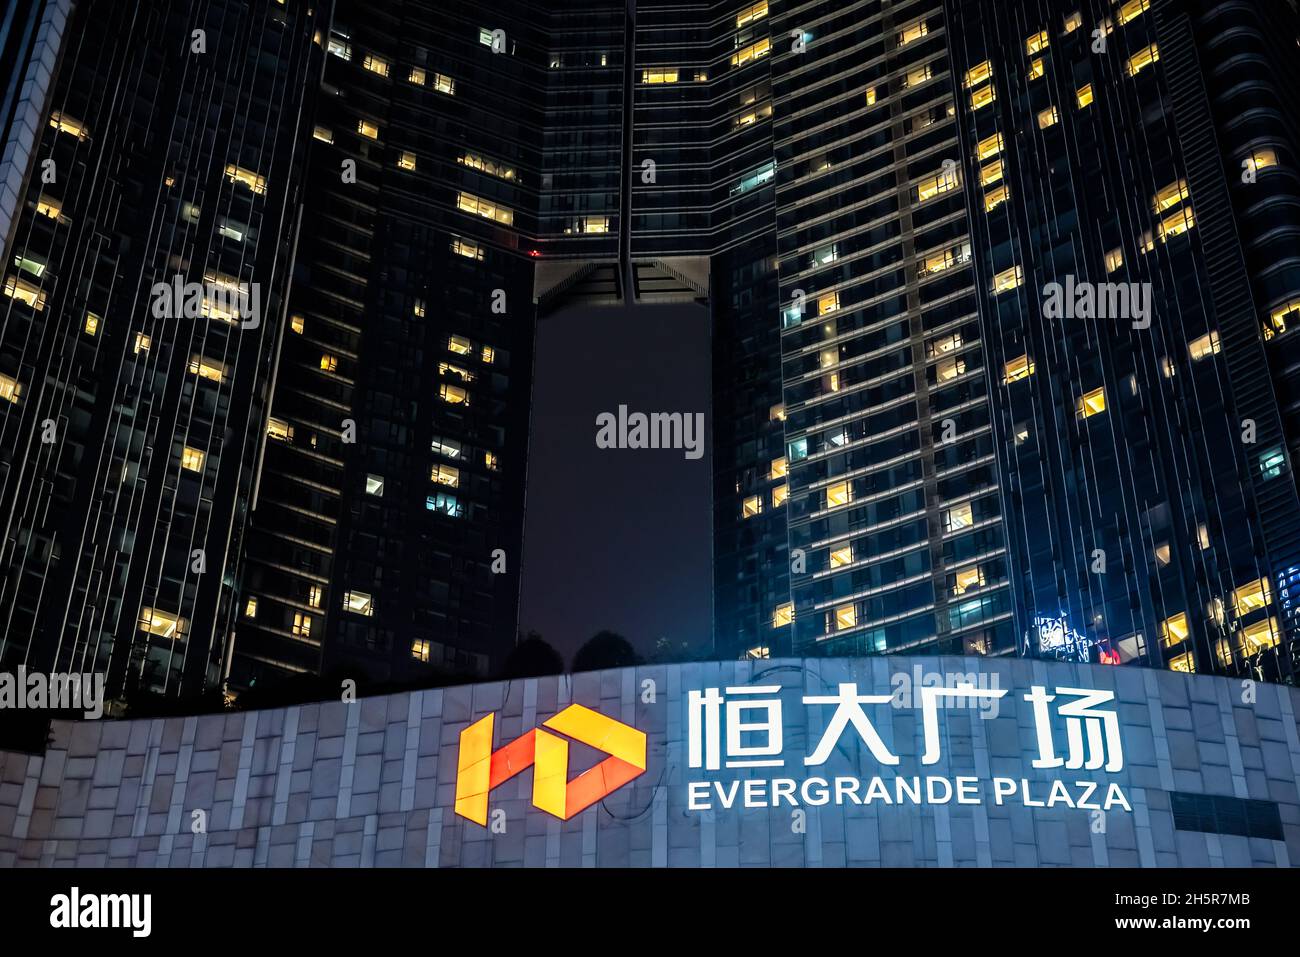 Chengdu, Sichuan province, China - Oct 28, 2021 : Evergrande Plaza commercial mall and skyscraper illuminated at night Stock Photo